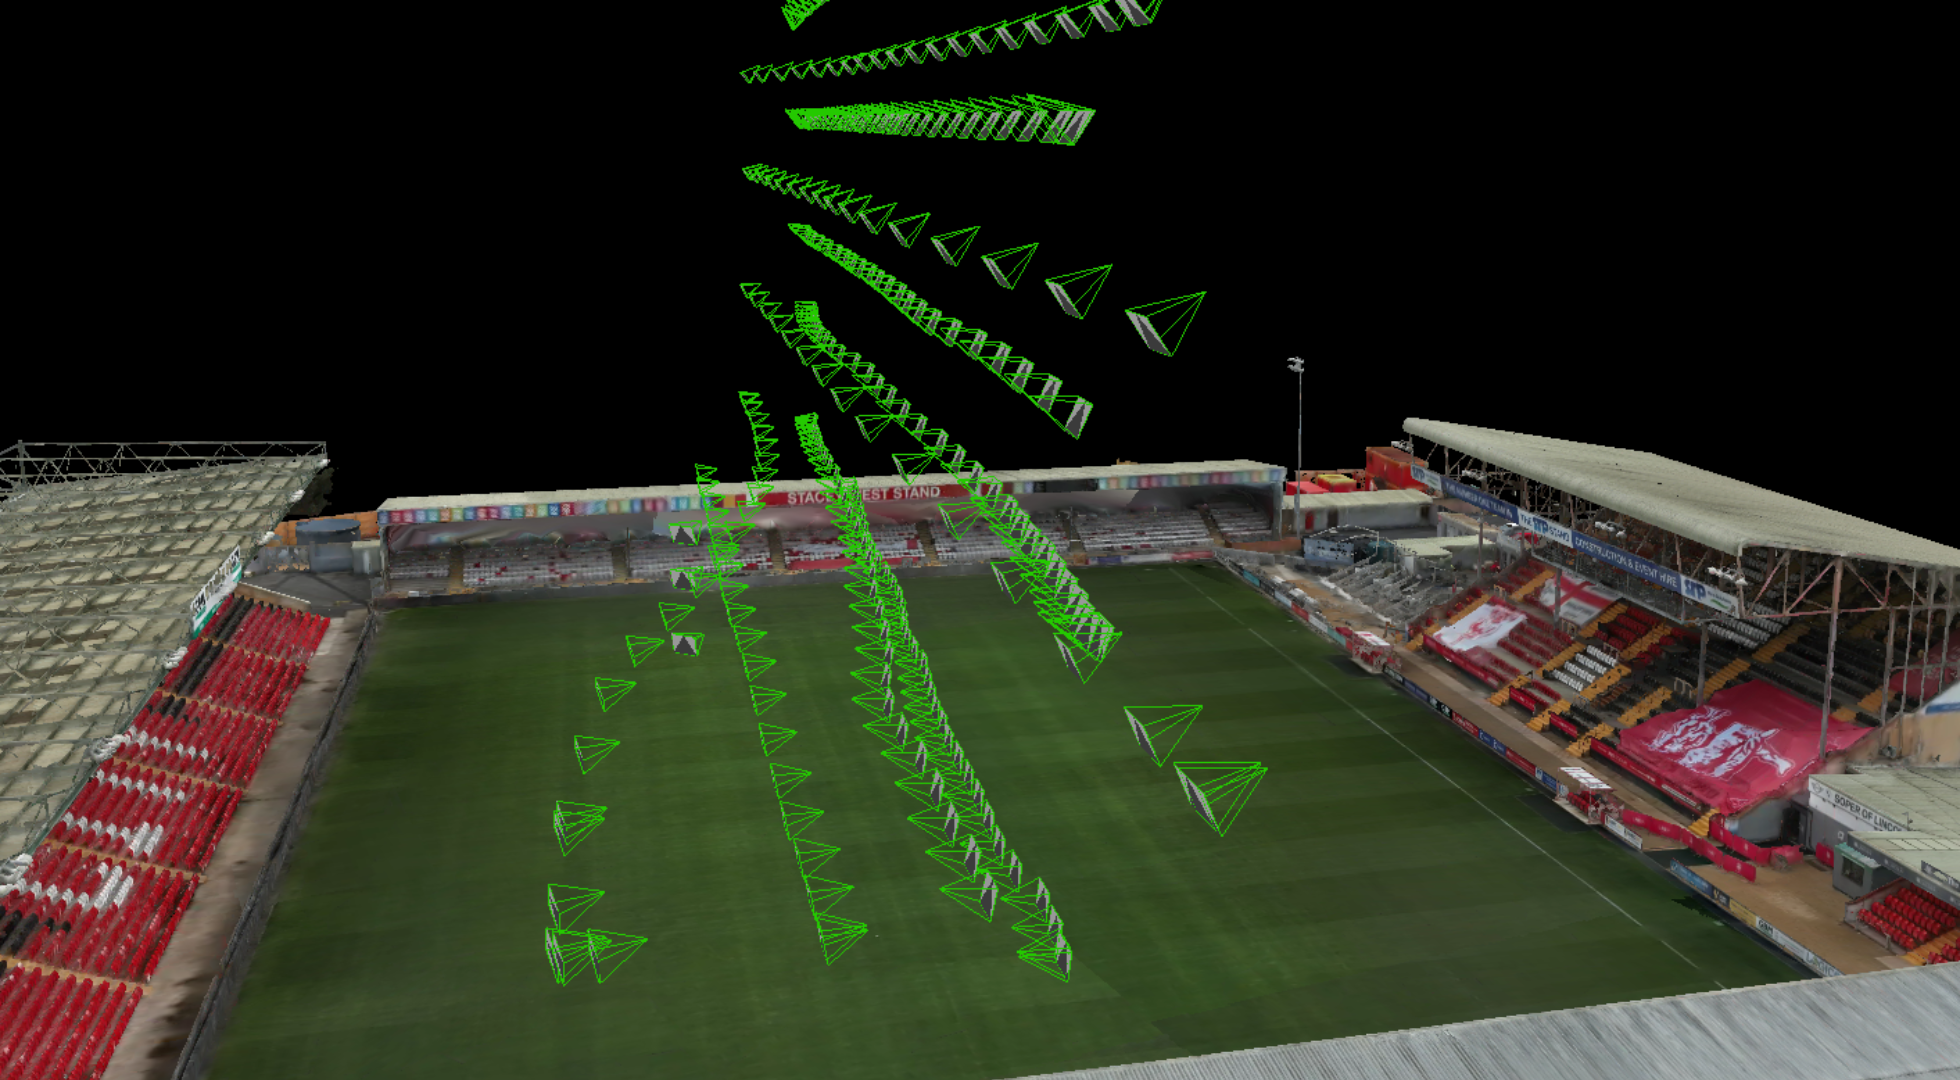 Manual imagery was taken during the drone photogrammetry mission of Lincoln City's stadium.